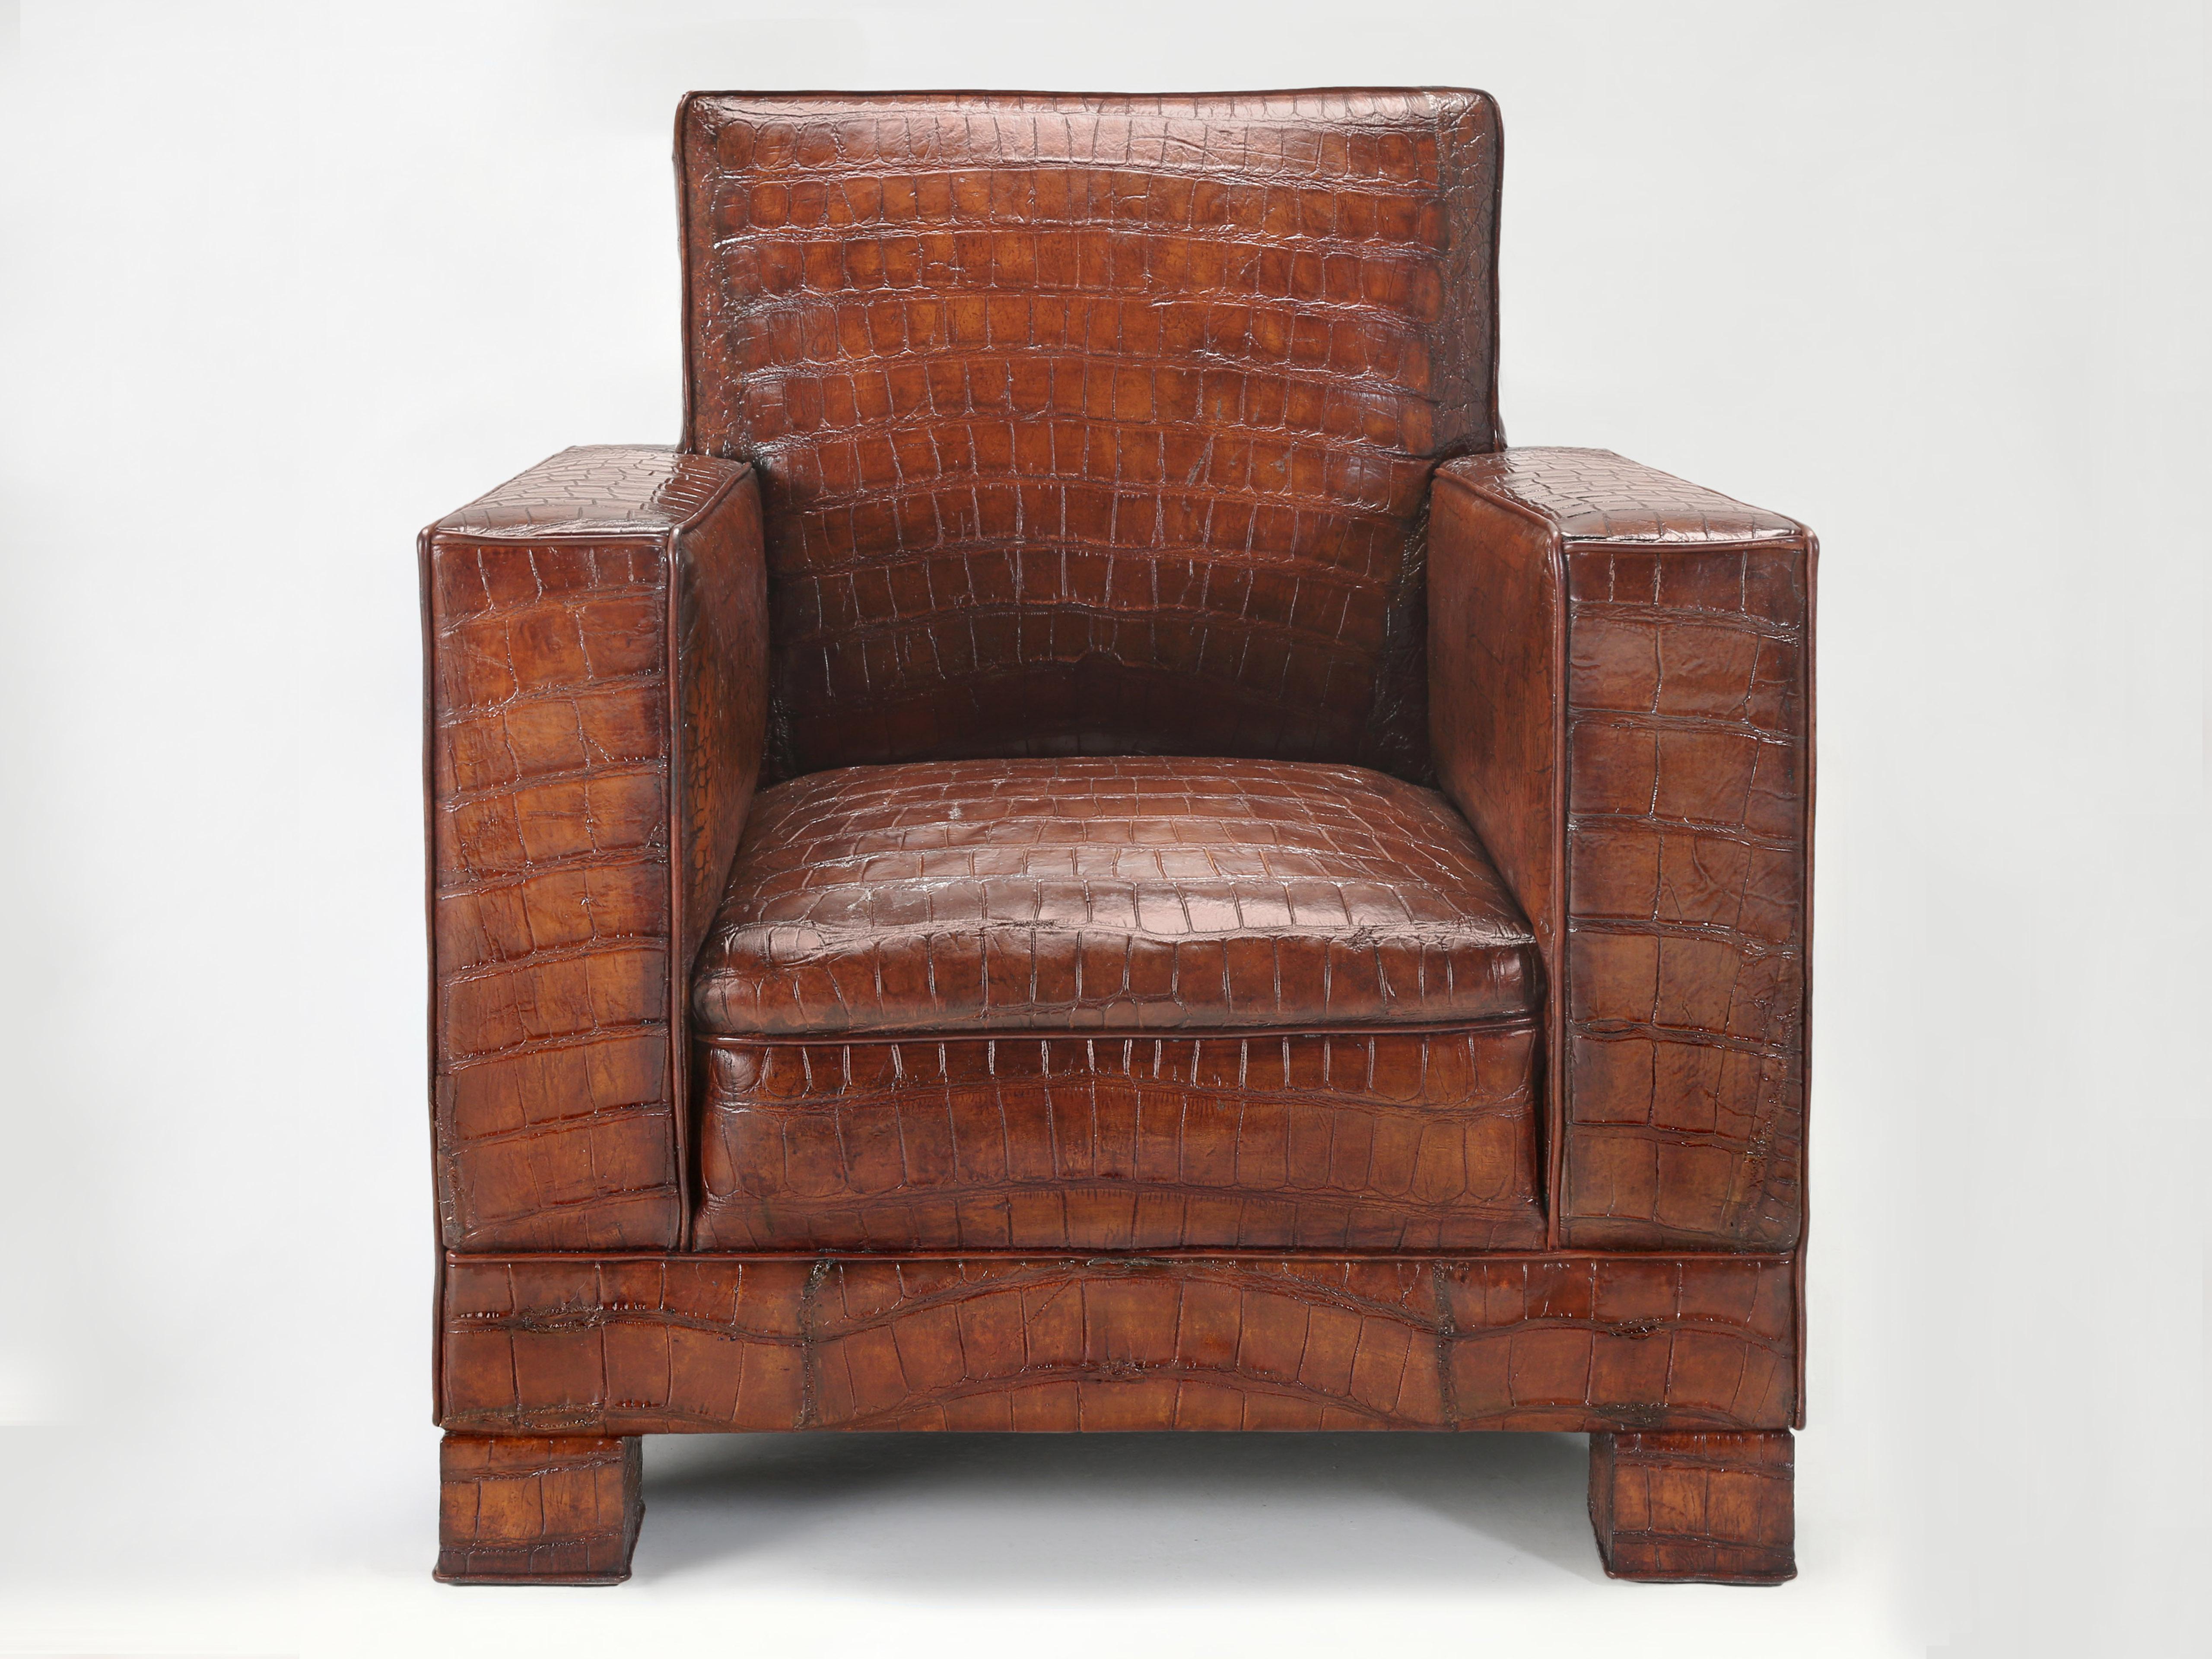 French Art Deco inspired Club Chair, one of a pair in stock upholstered in genuine Alligator hides. Many years ago, a great designer once told me that if you are going to copy someone’s work, make sure you are copying from only the best. There is